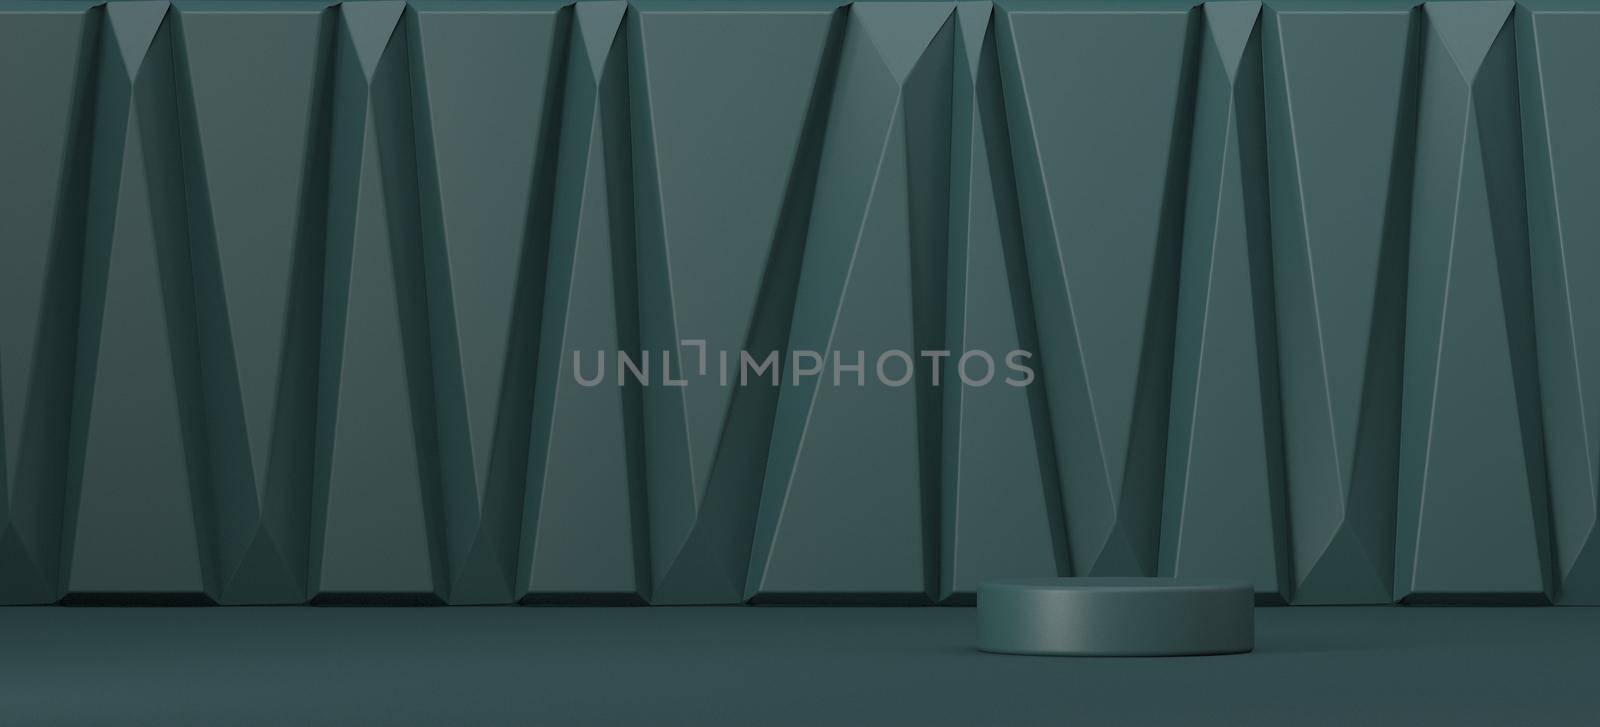 Mock up podium for product presentation with triangles on wall 3D render illustration on green background